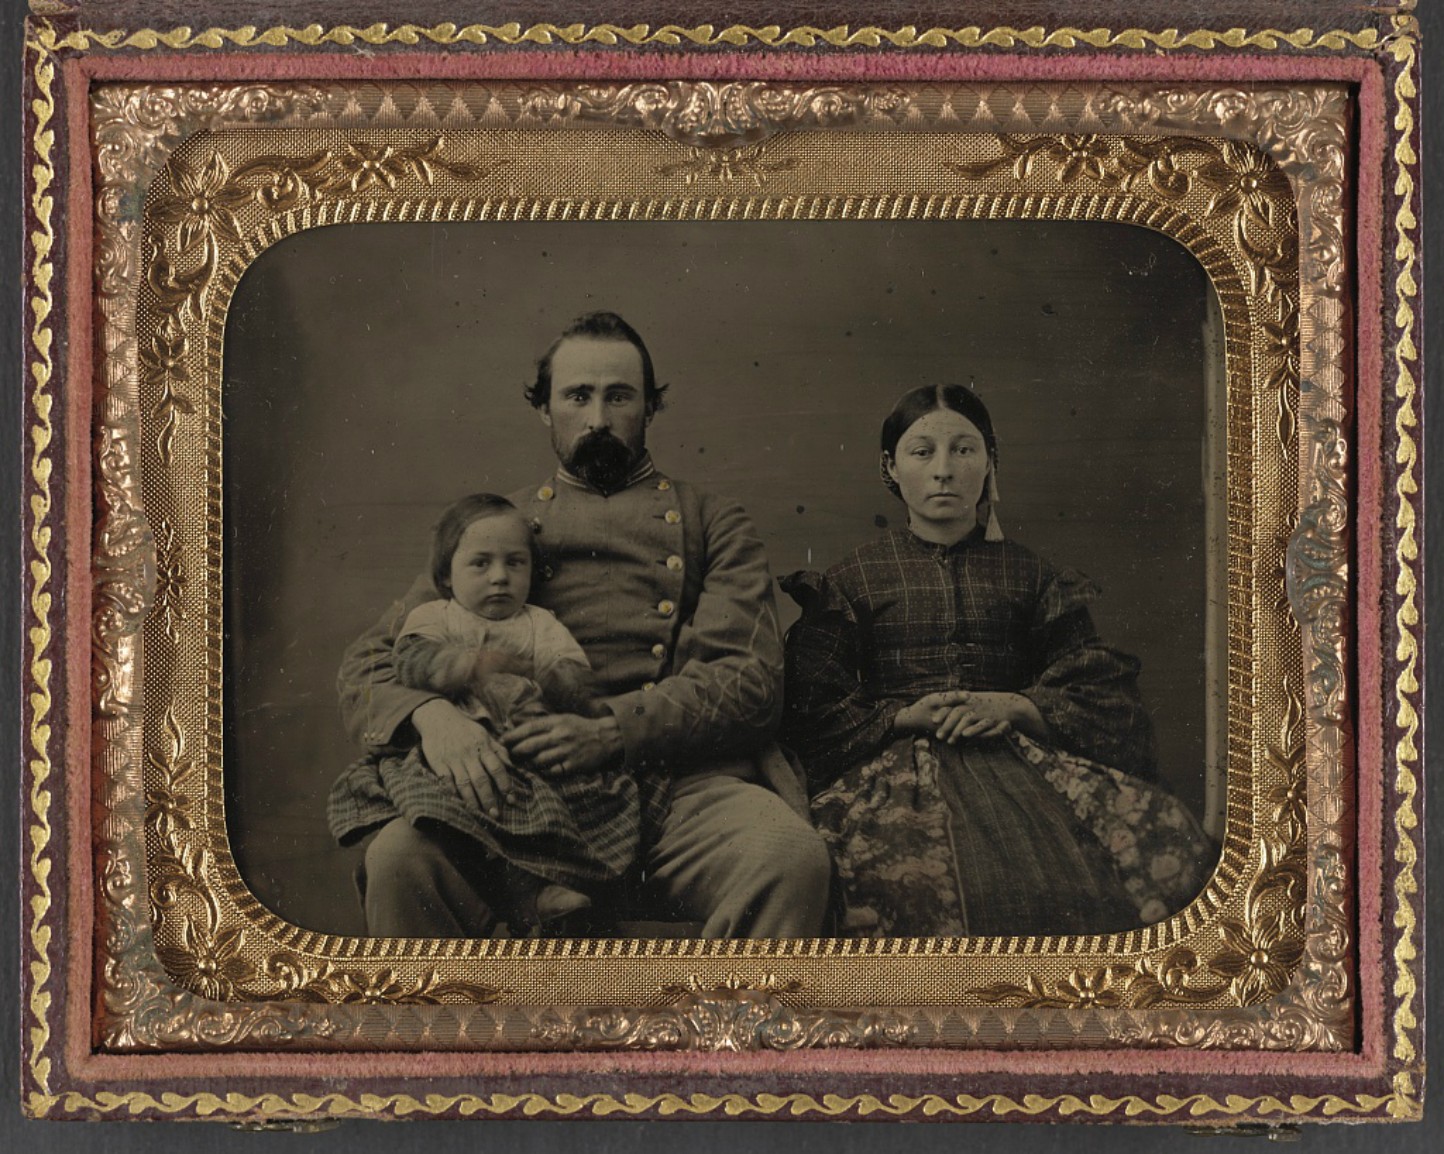 Framed black and white image of a man, woman and child. The man wears a confederate army uniform.